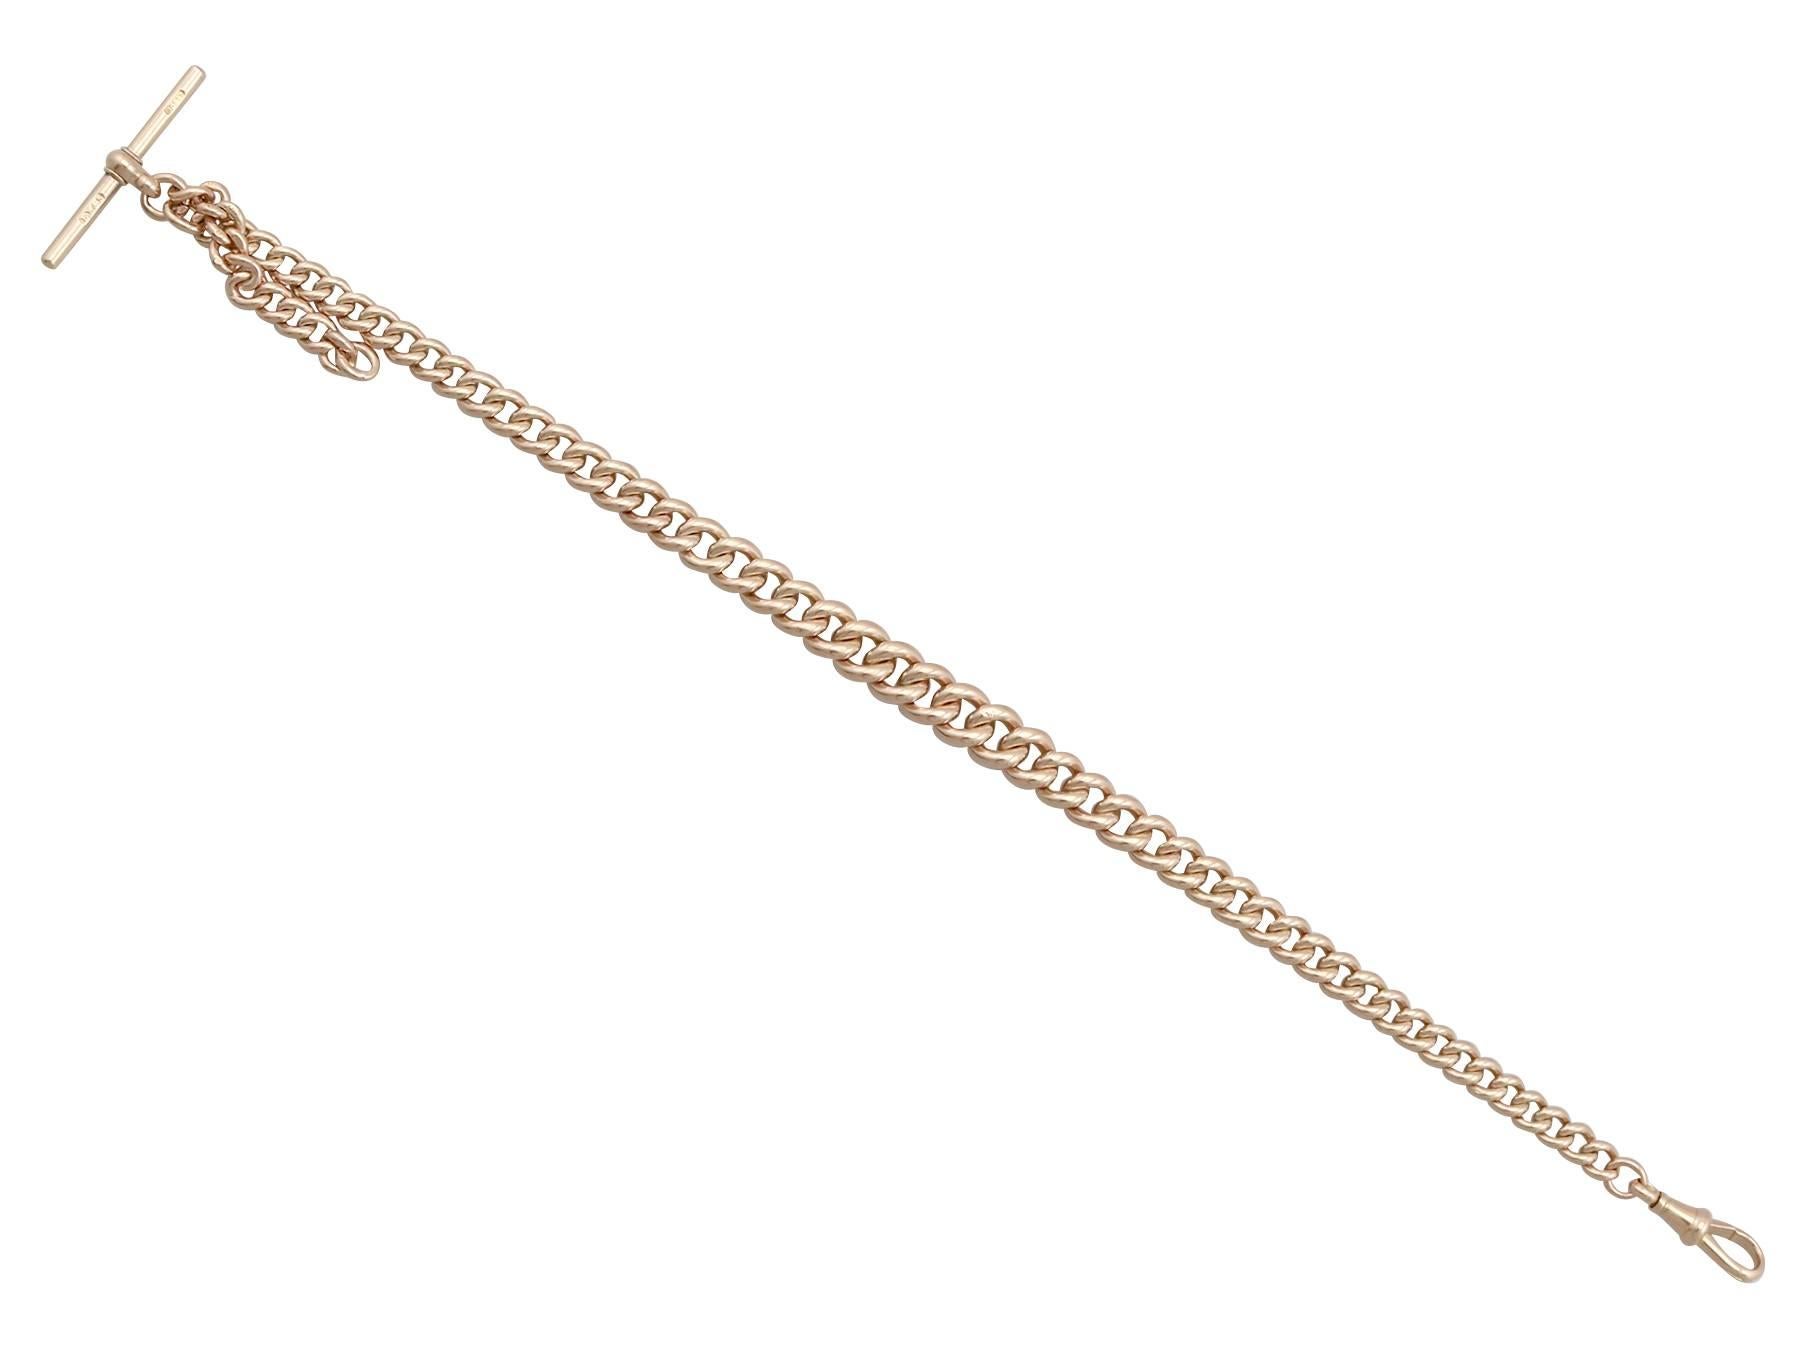 An exceptional antique 9 carat yellow gold Albert watch chain ; part of our diverse antique jewellery and estate jewelry collections.

This exceptional, fine and impressive Albert watch chain has been crafted in 9 ct yellow gold.

The rounded curb